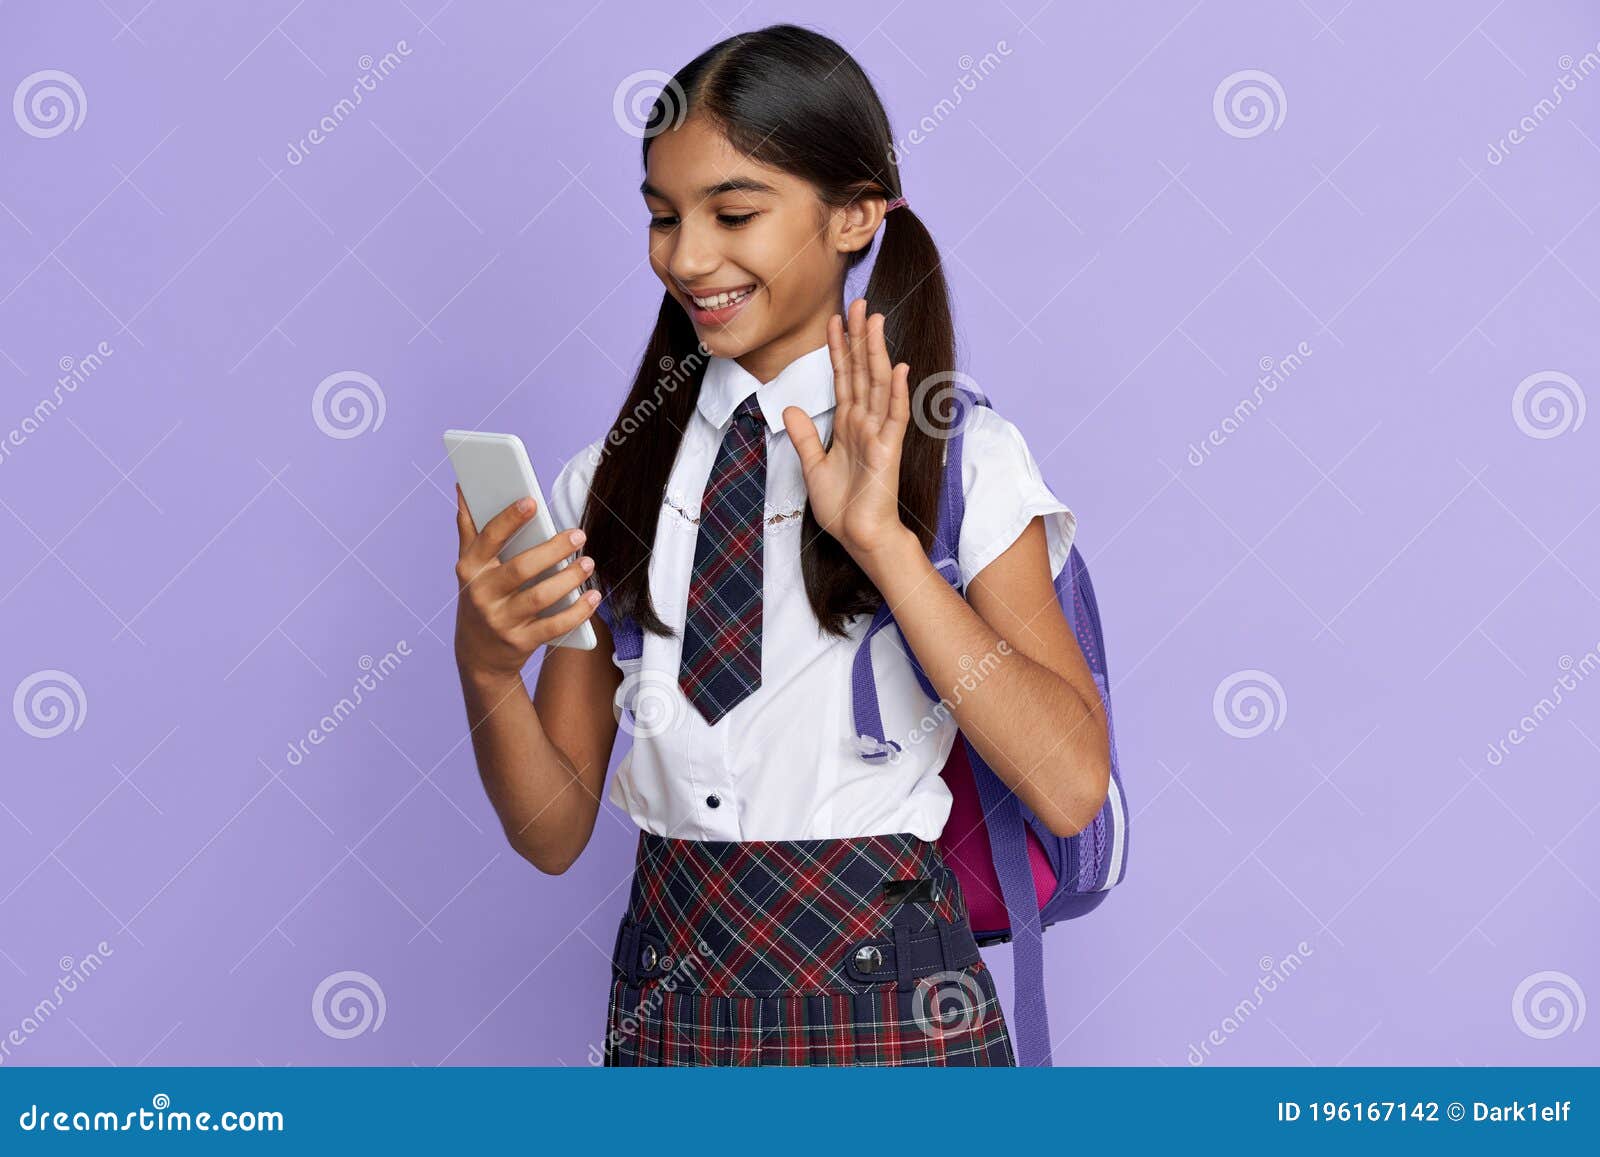 Hindischoolgirlxxx - Smiling Indian School Girl Video Calling on Mobile Phone Isolated on  Background. Stock Photo - Image of learn, cellphone: 196167142